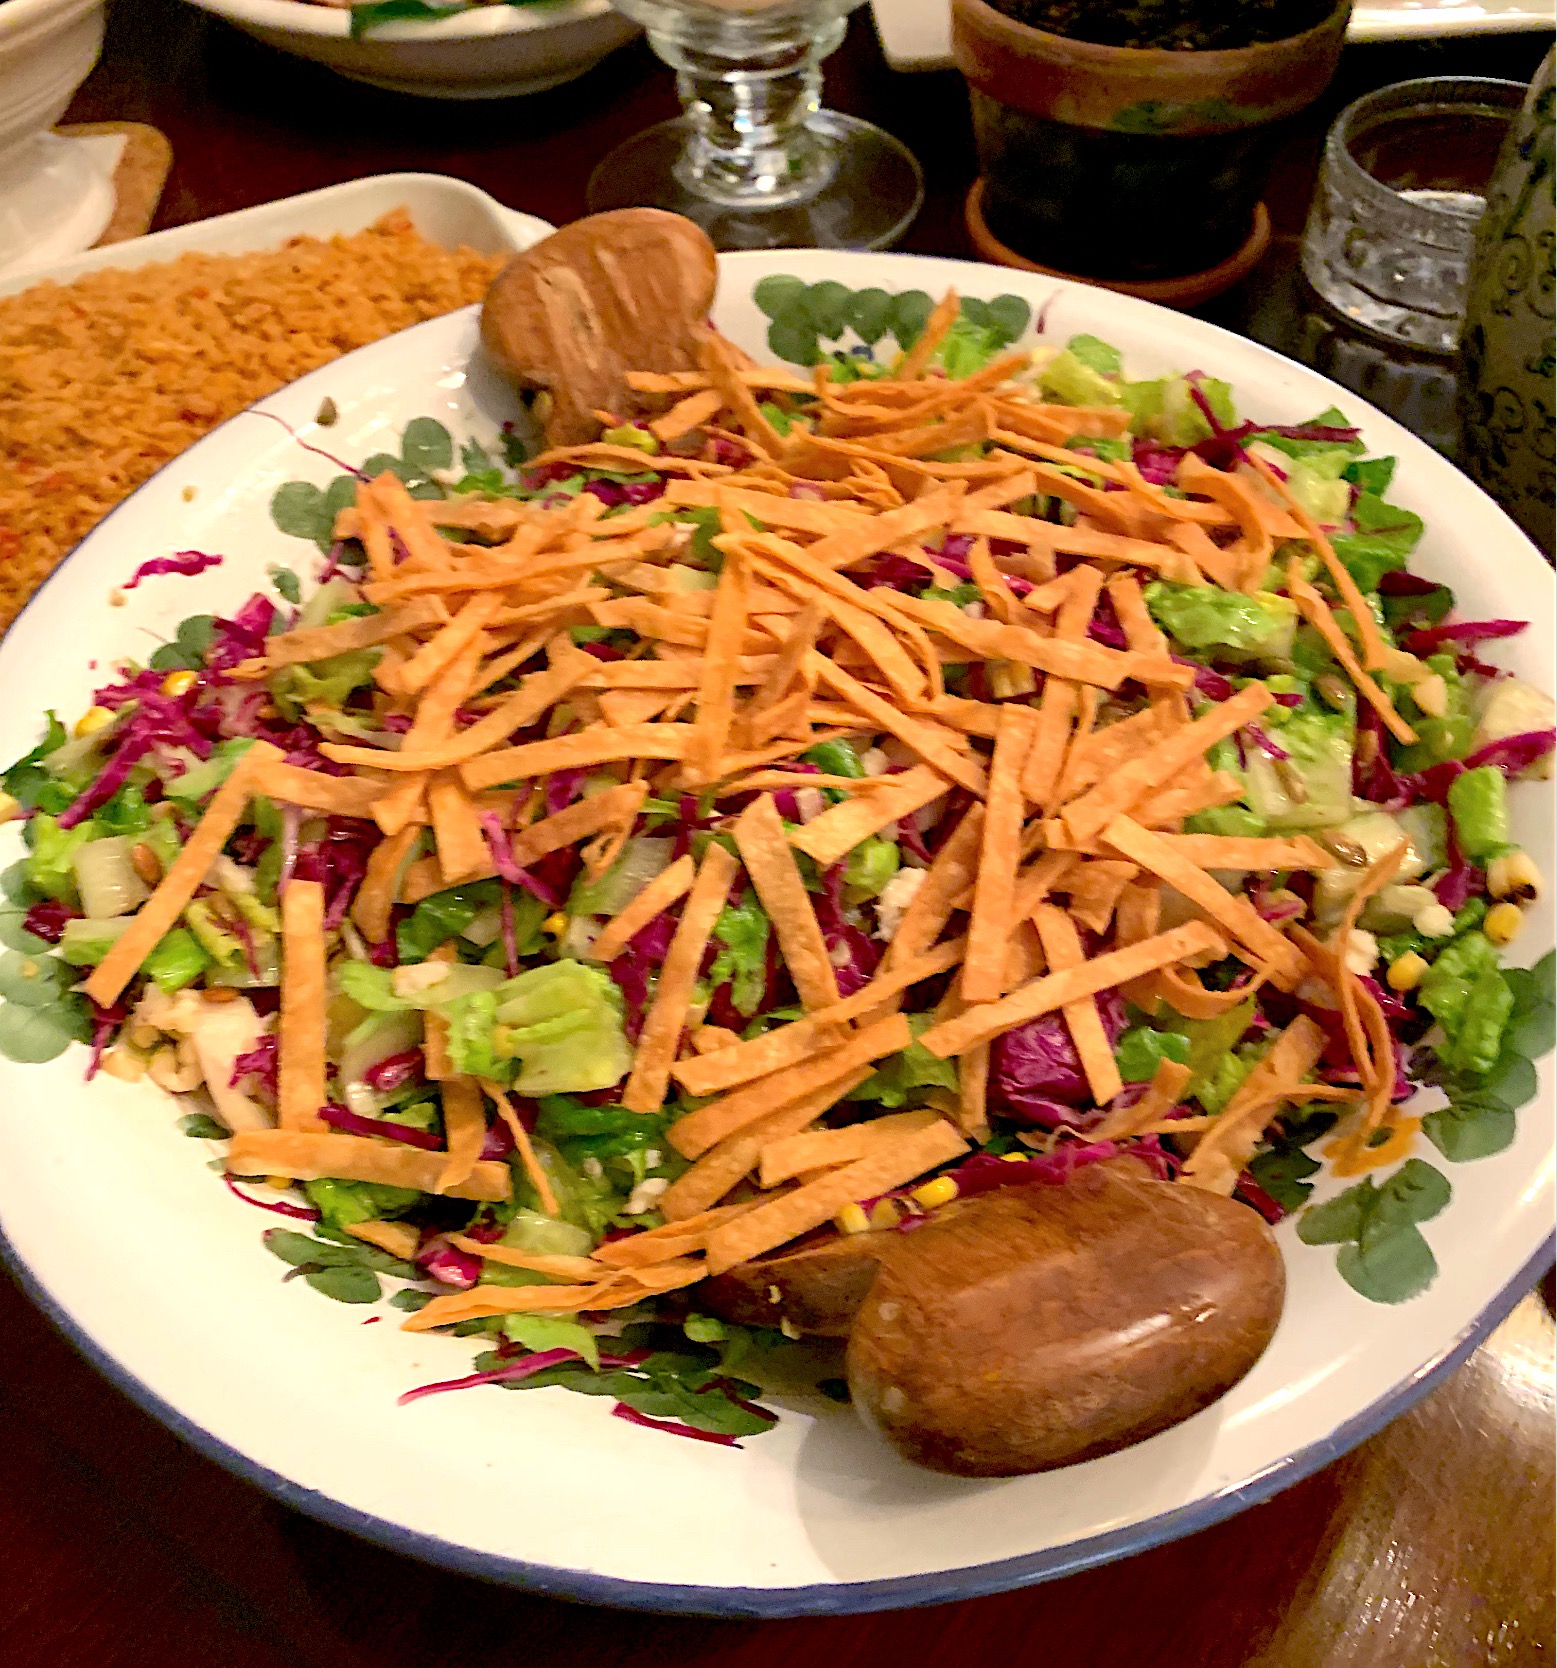 Mexican GreenSalad topped with tortilla chips
Romaine, purple cabbage, grilled corn, hearts of palm, pepitas seeds, tortilla chips  #mexicansalad